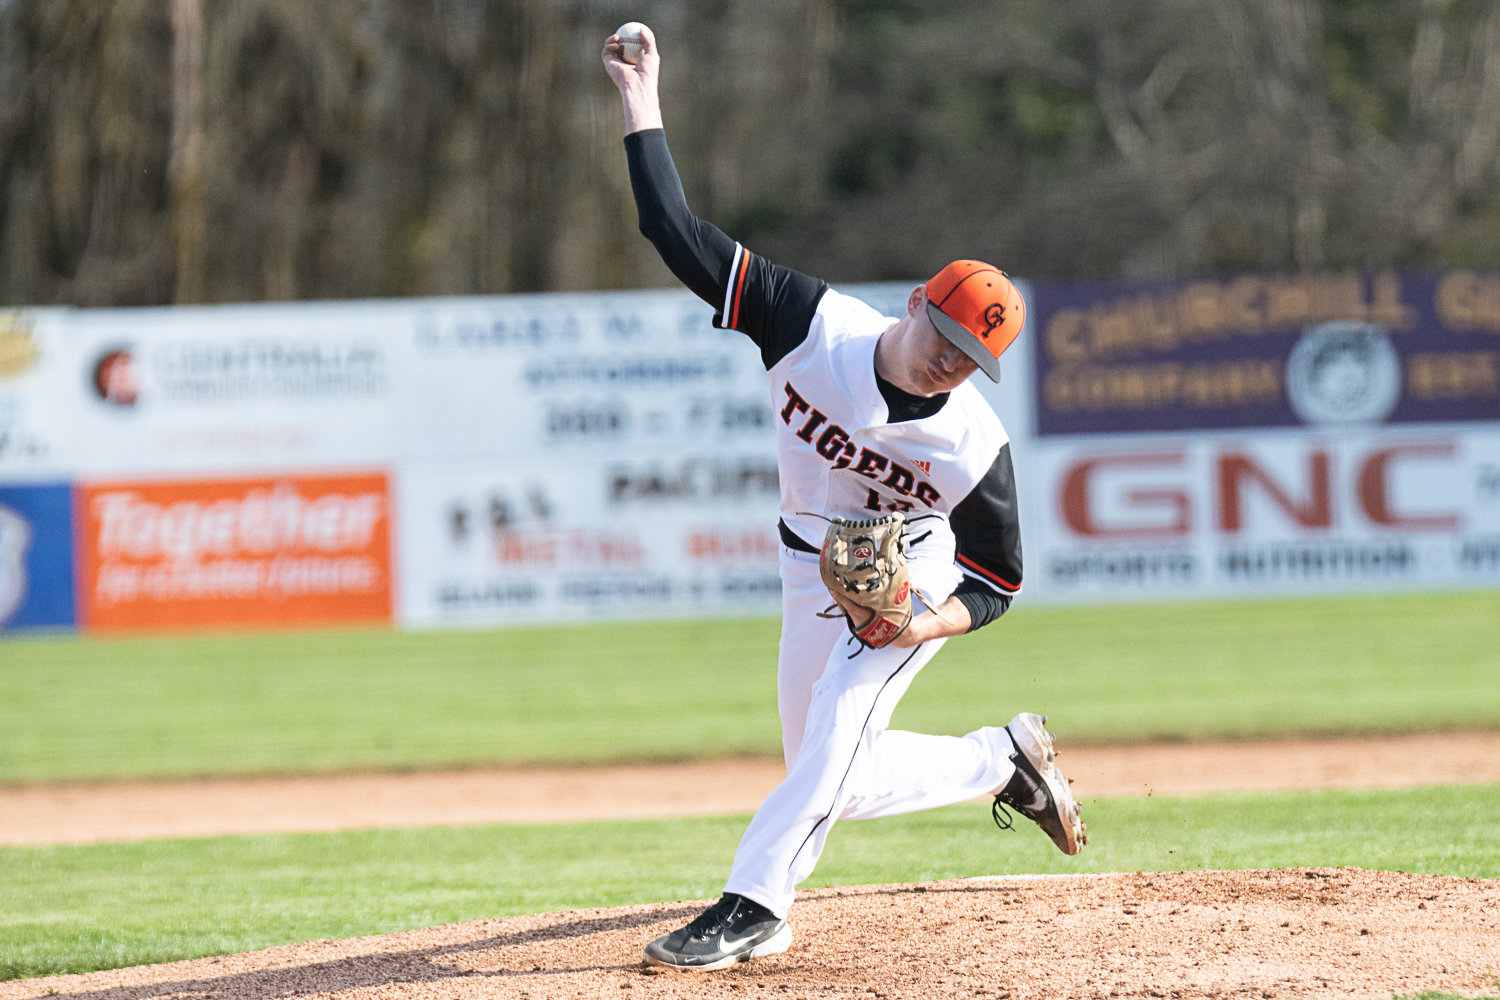 Brady Sprague throws a pitch in the first inning of Centralia's 10-0 loss to Tumwater on March 29.